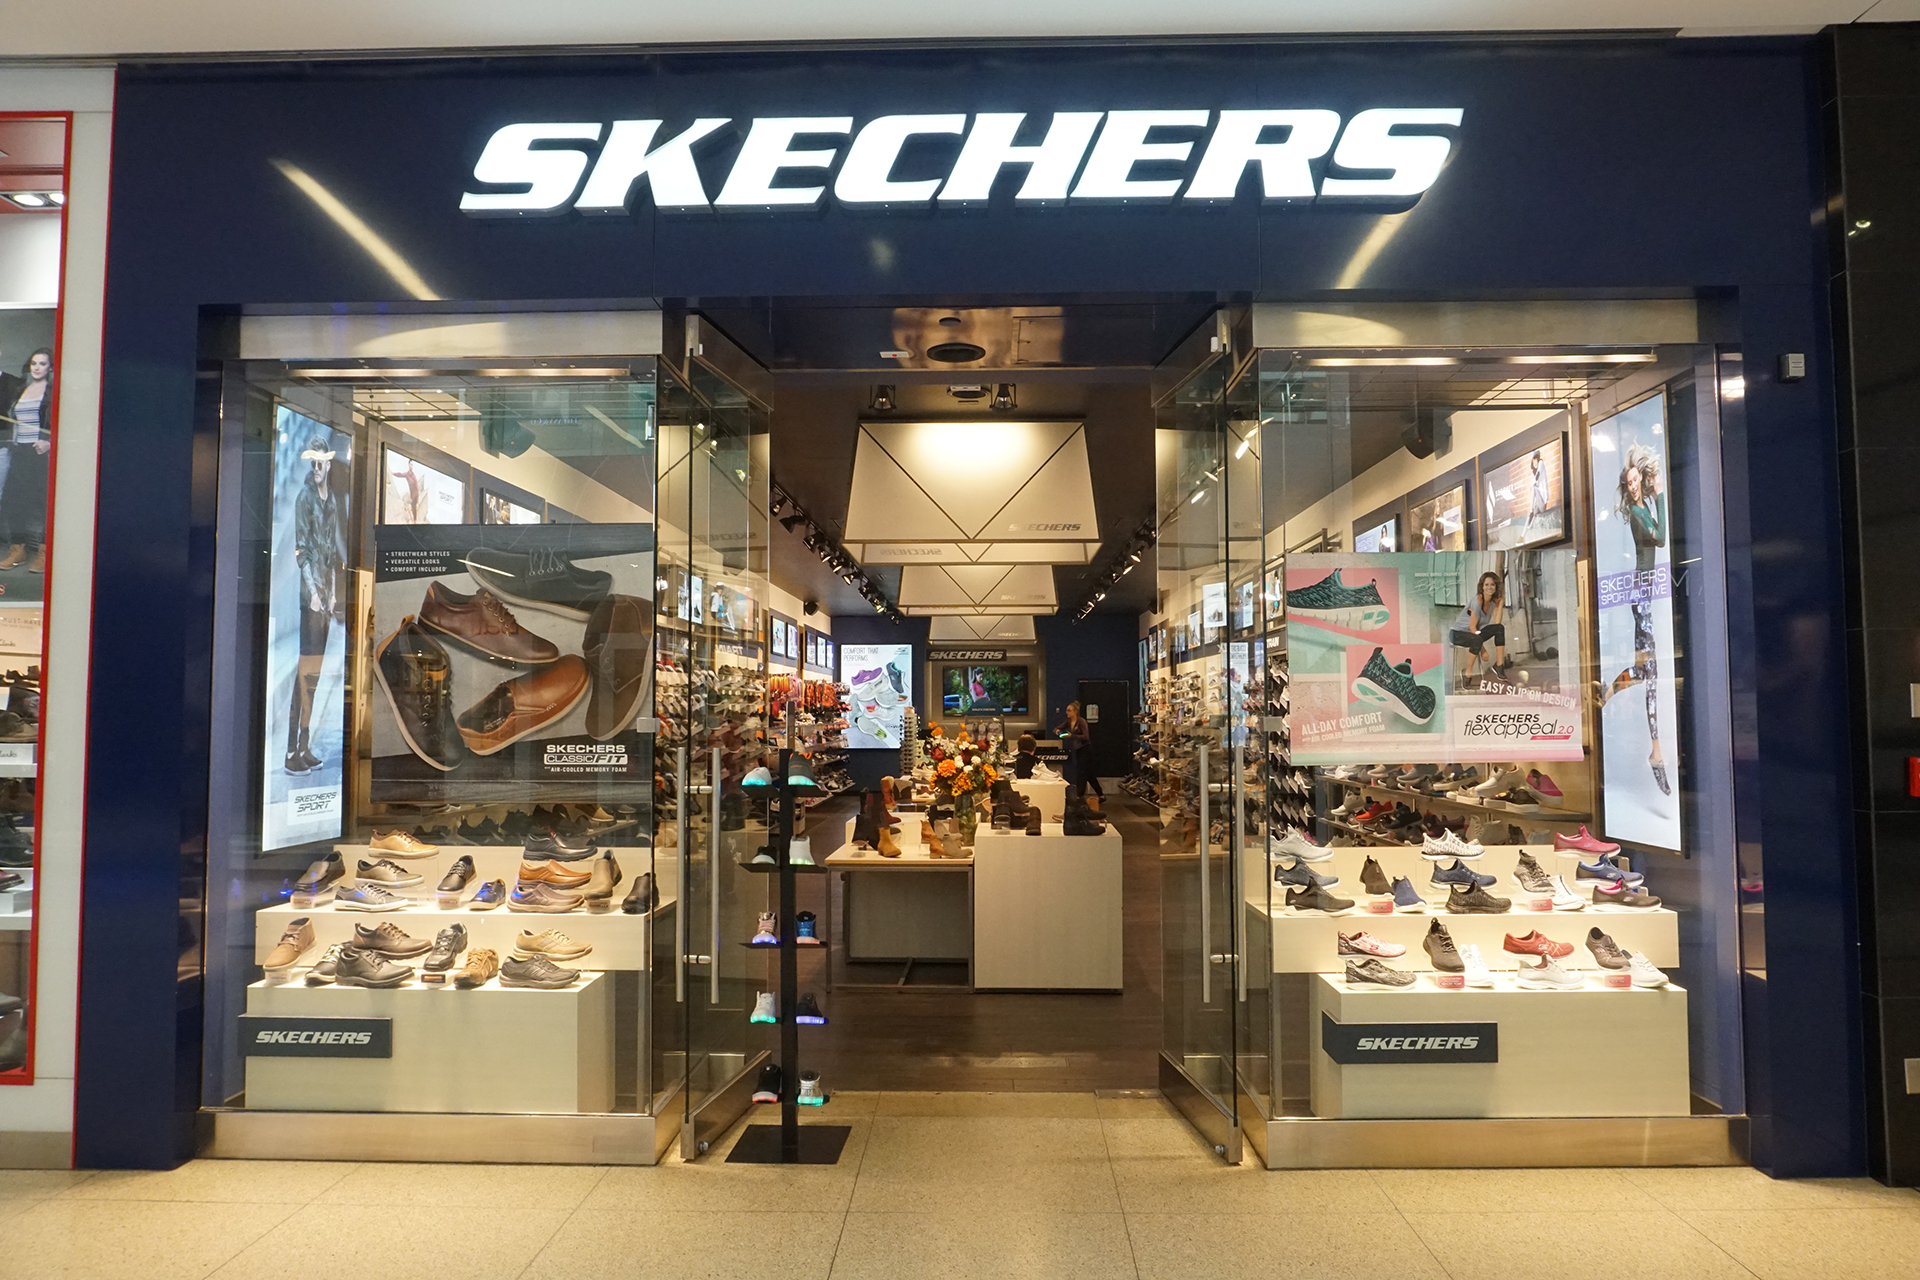 where is the closest skechers store